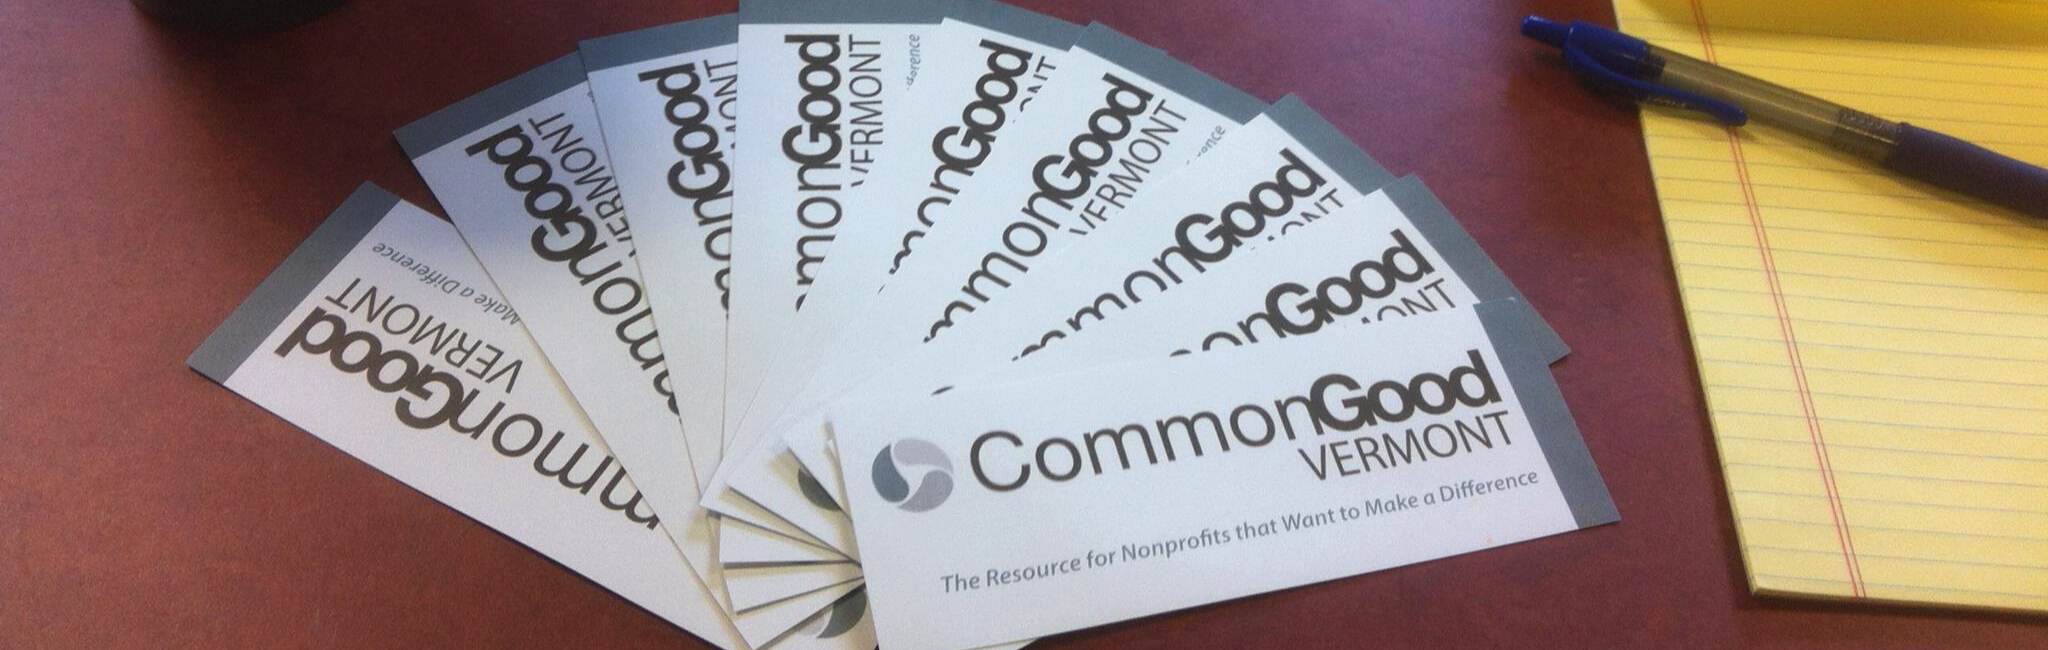 Business cards that say "Common Good Vermont: The resource for nonprofits that want to make a difference are splayed out on a desk next to a notepad.